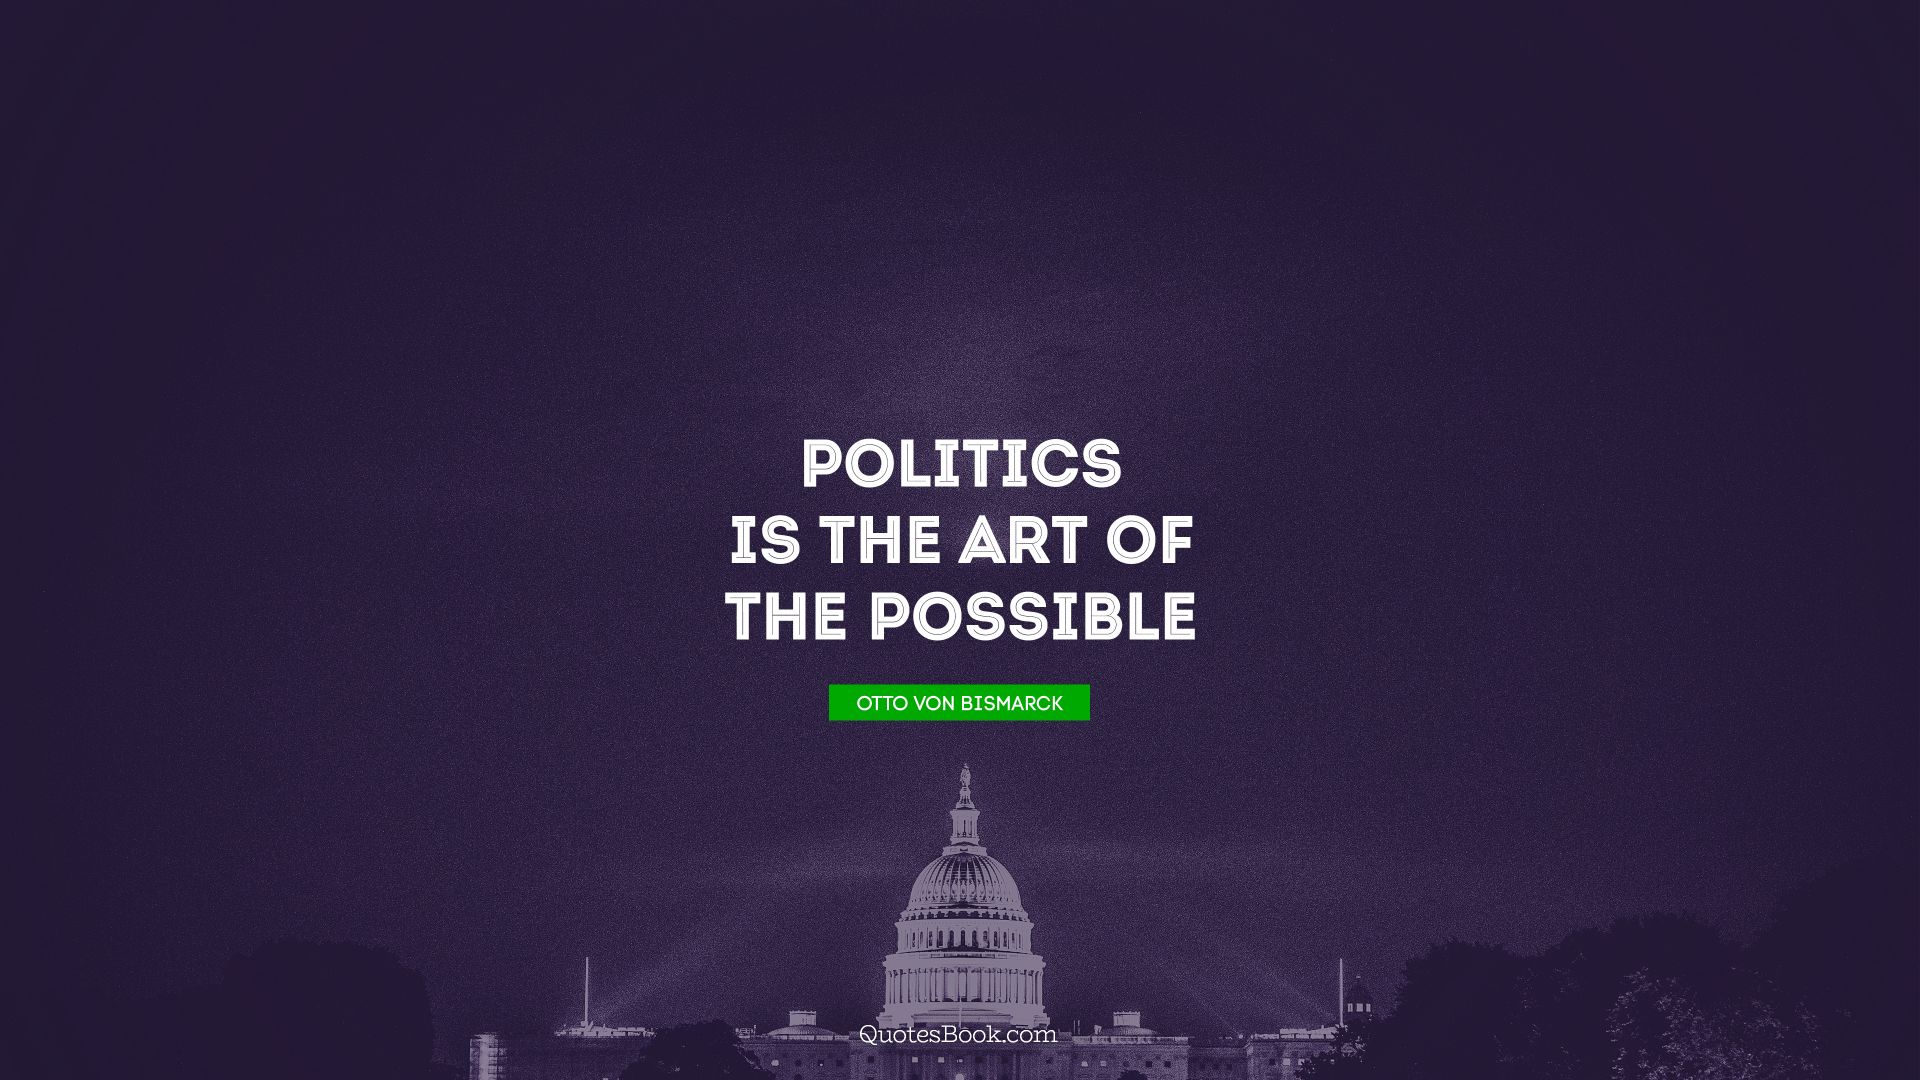 Politics is the art of the possible. - Quote by Otto von Bismarck